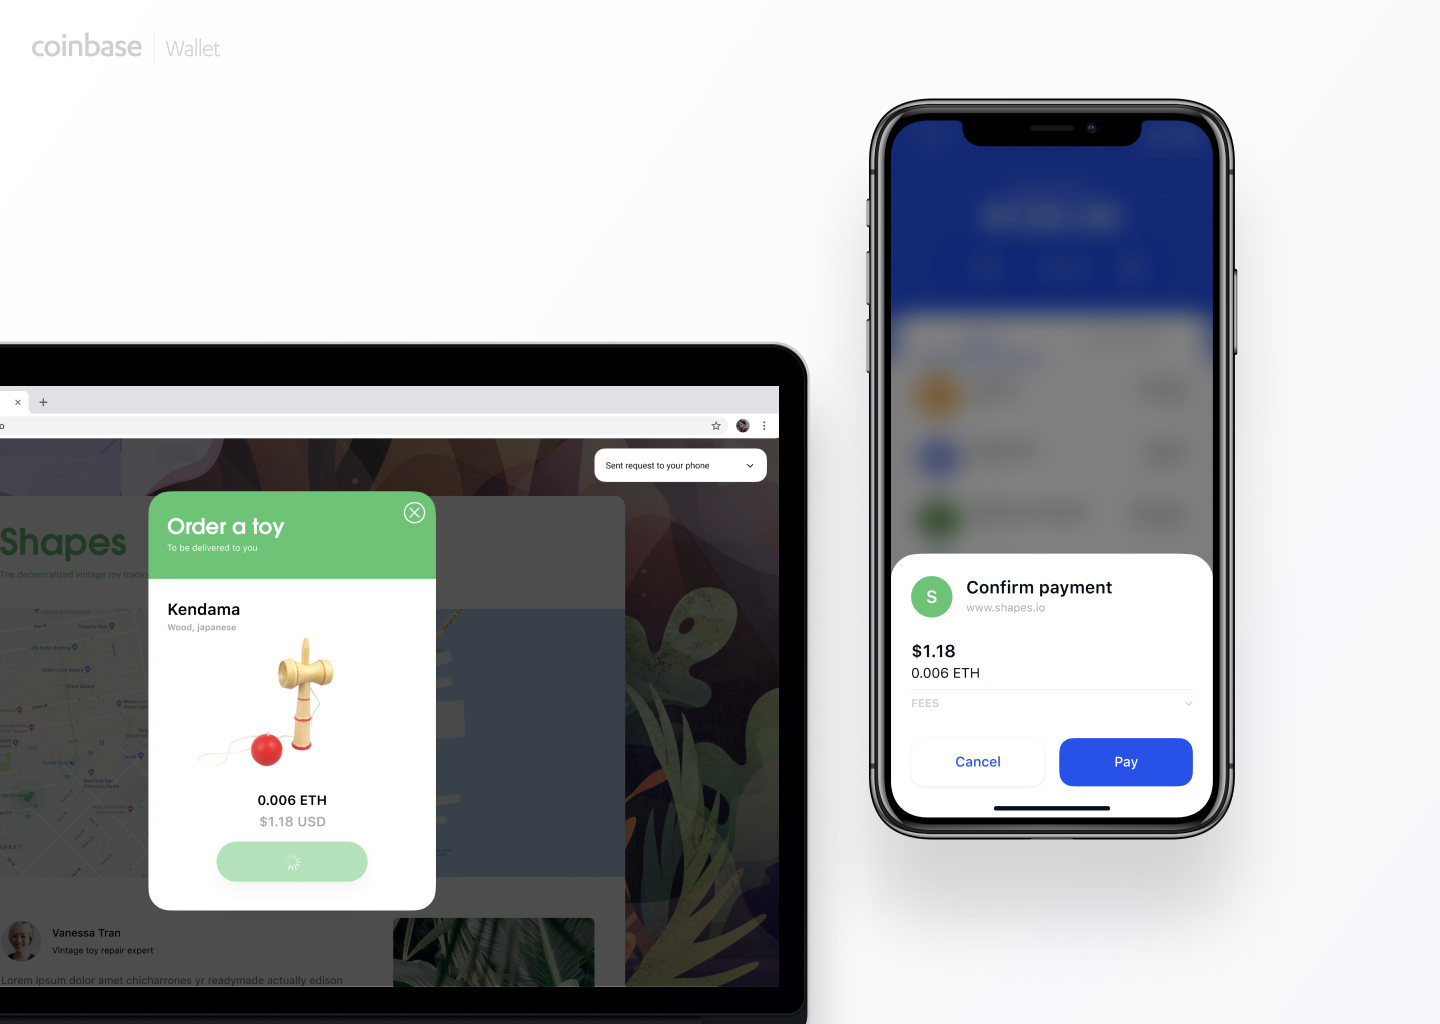 Coinbase Now Allows You To Access Dapps On Desktop Browsers